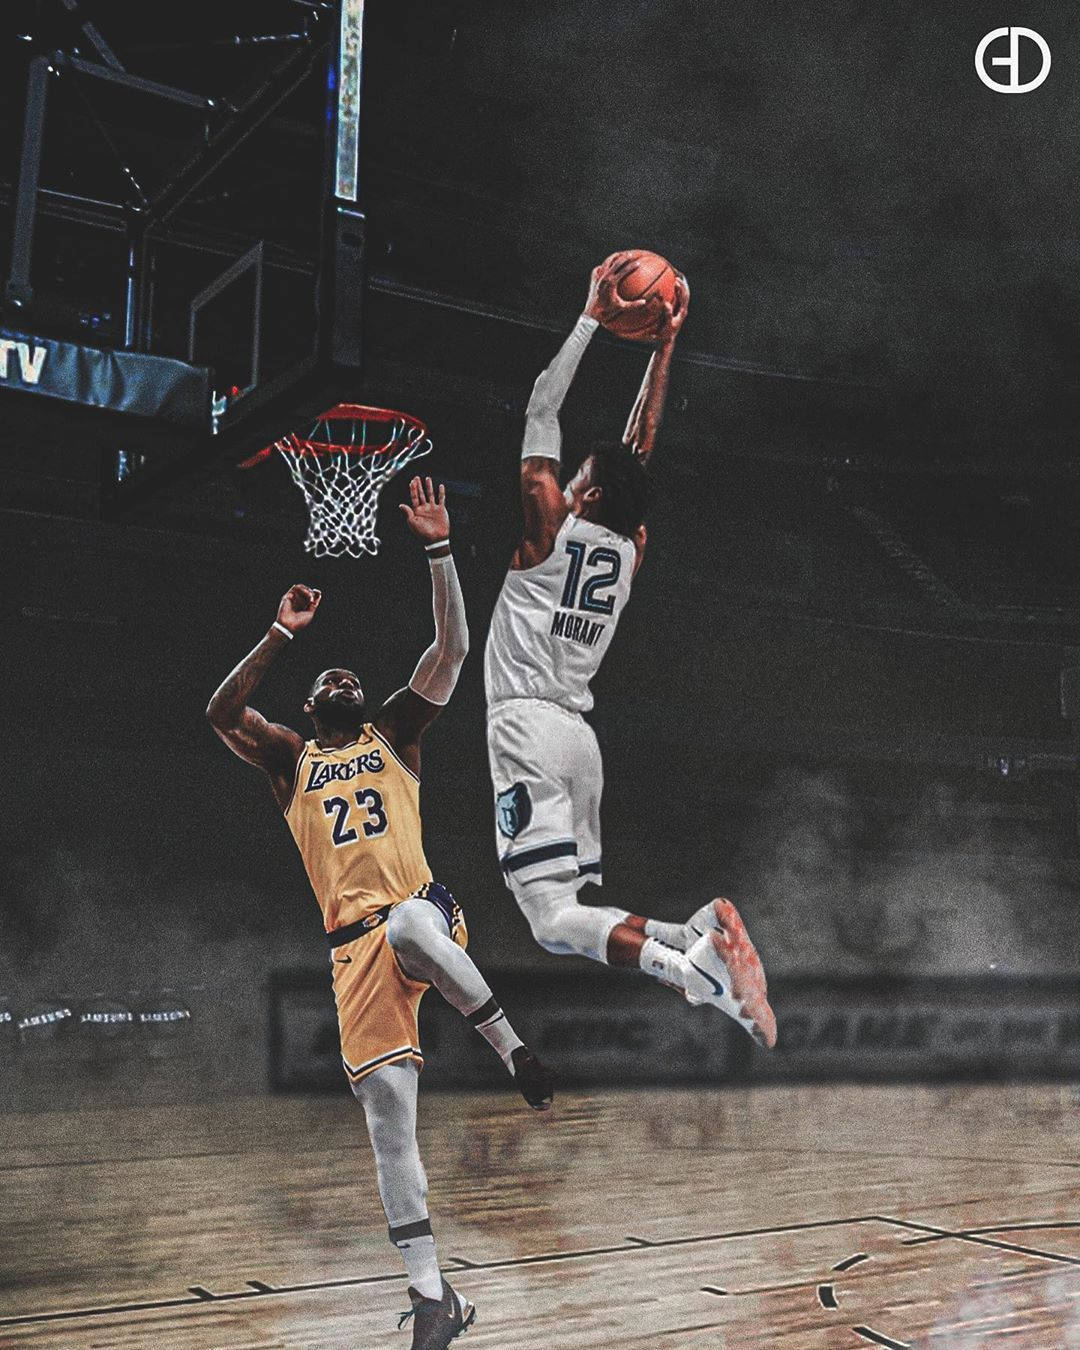 Two basketball players, one holding the ball and the other reaching for it. - Lebron James, Ja Morant